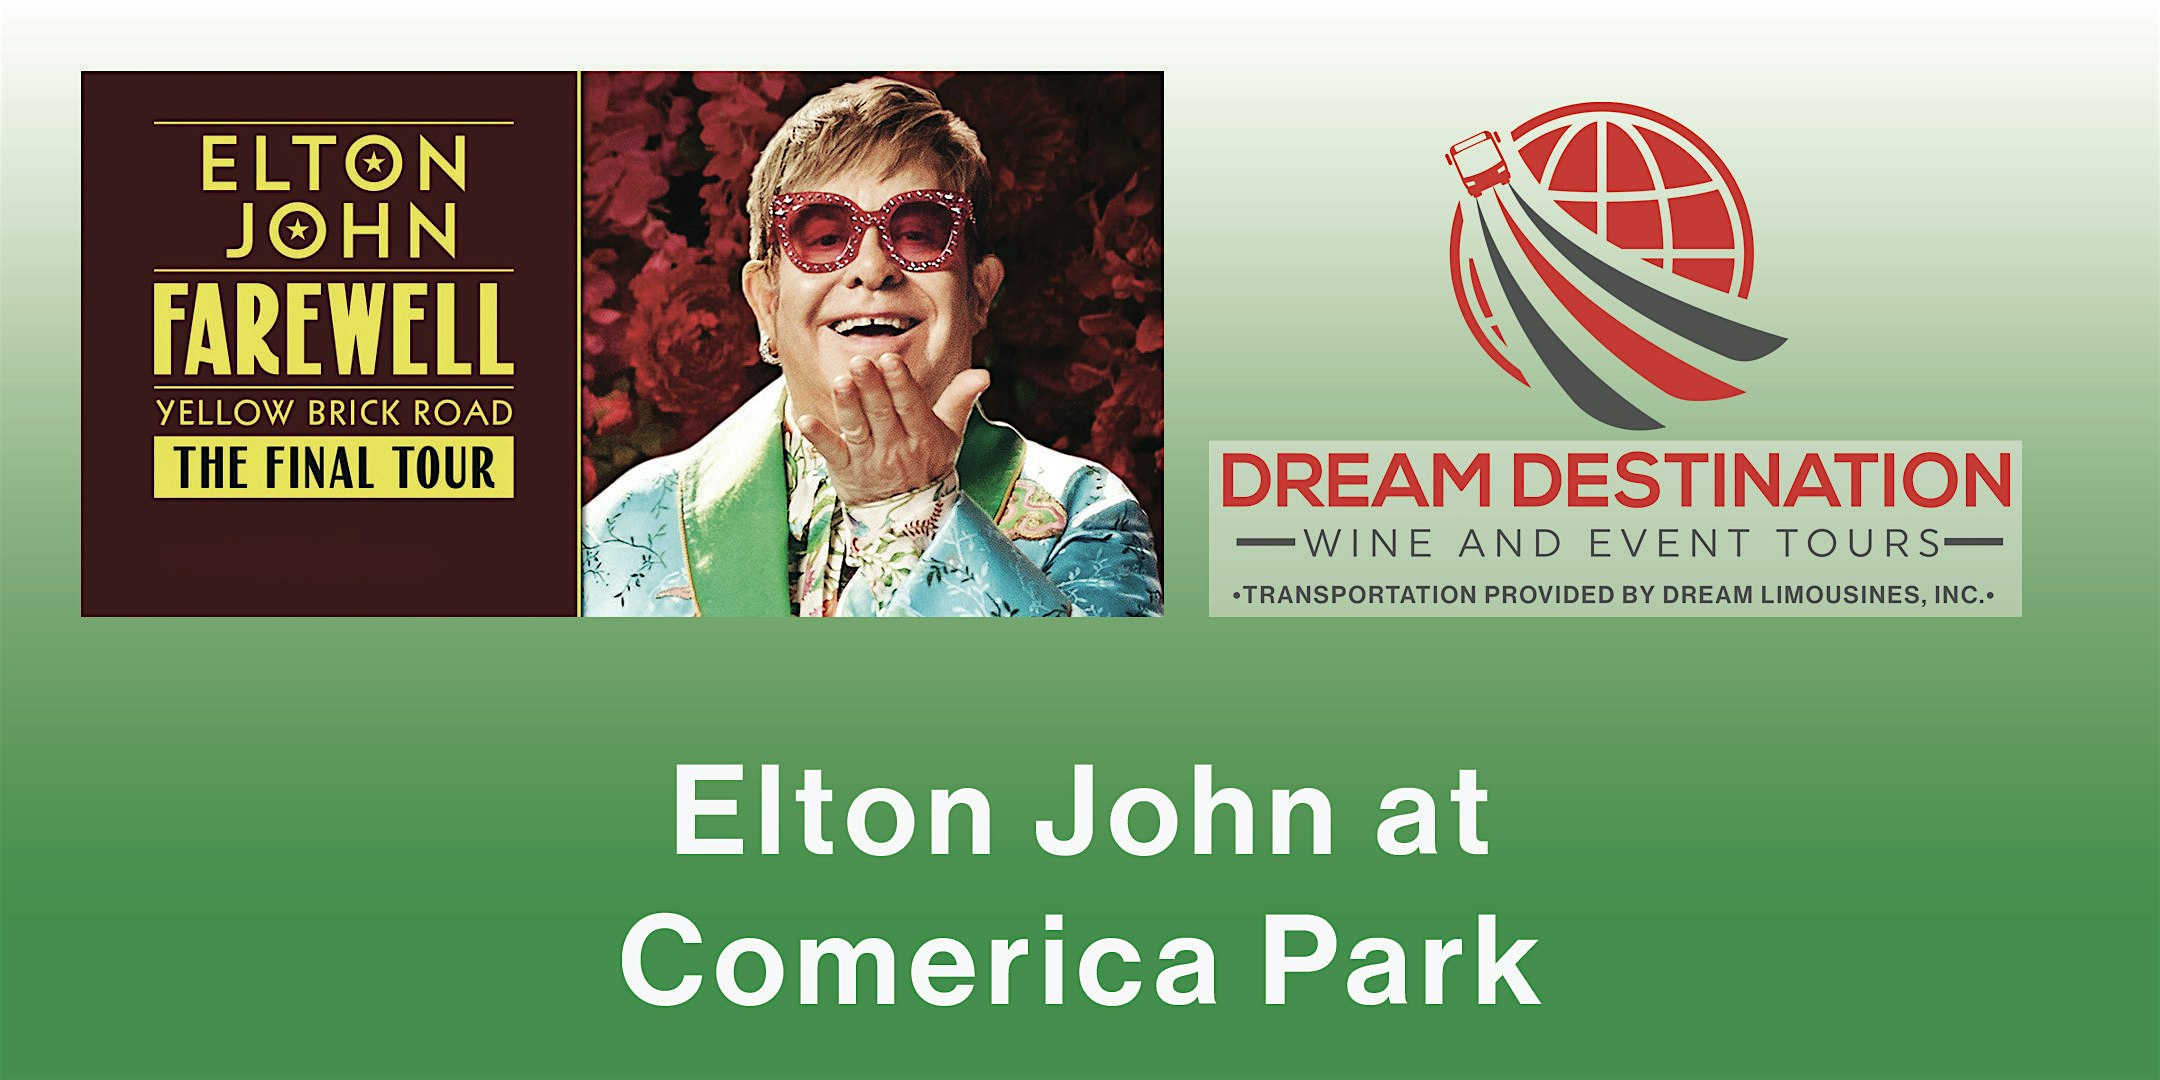 Shuttle Bus to See Elton John at Comerica Park